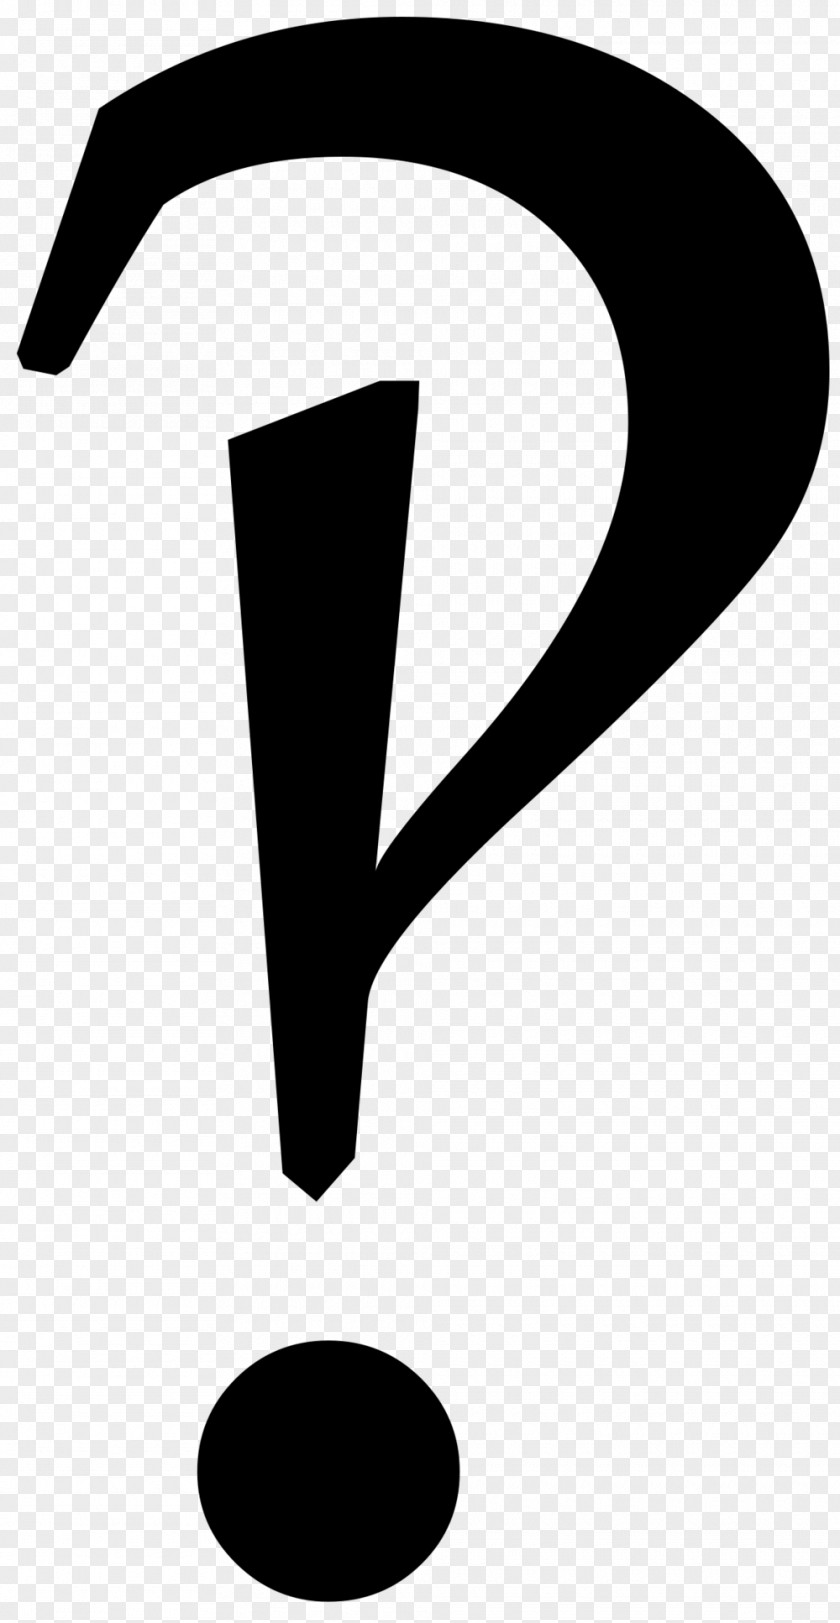 Interrobang Exclamation Mark Question Punctuation Rhetorical PNG